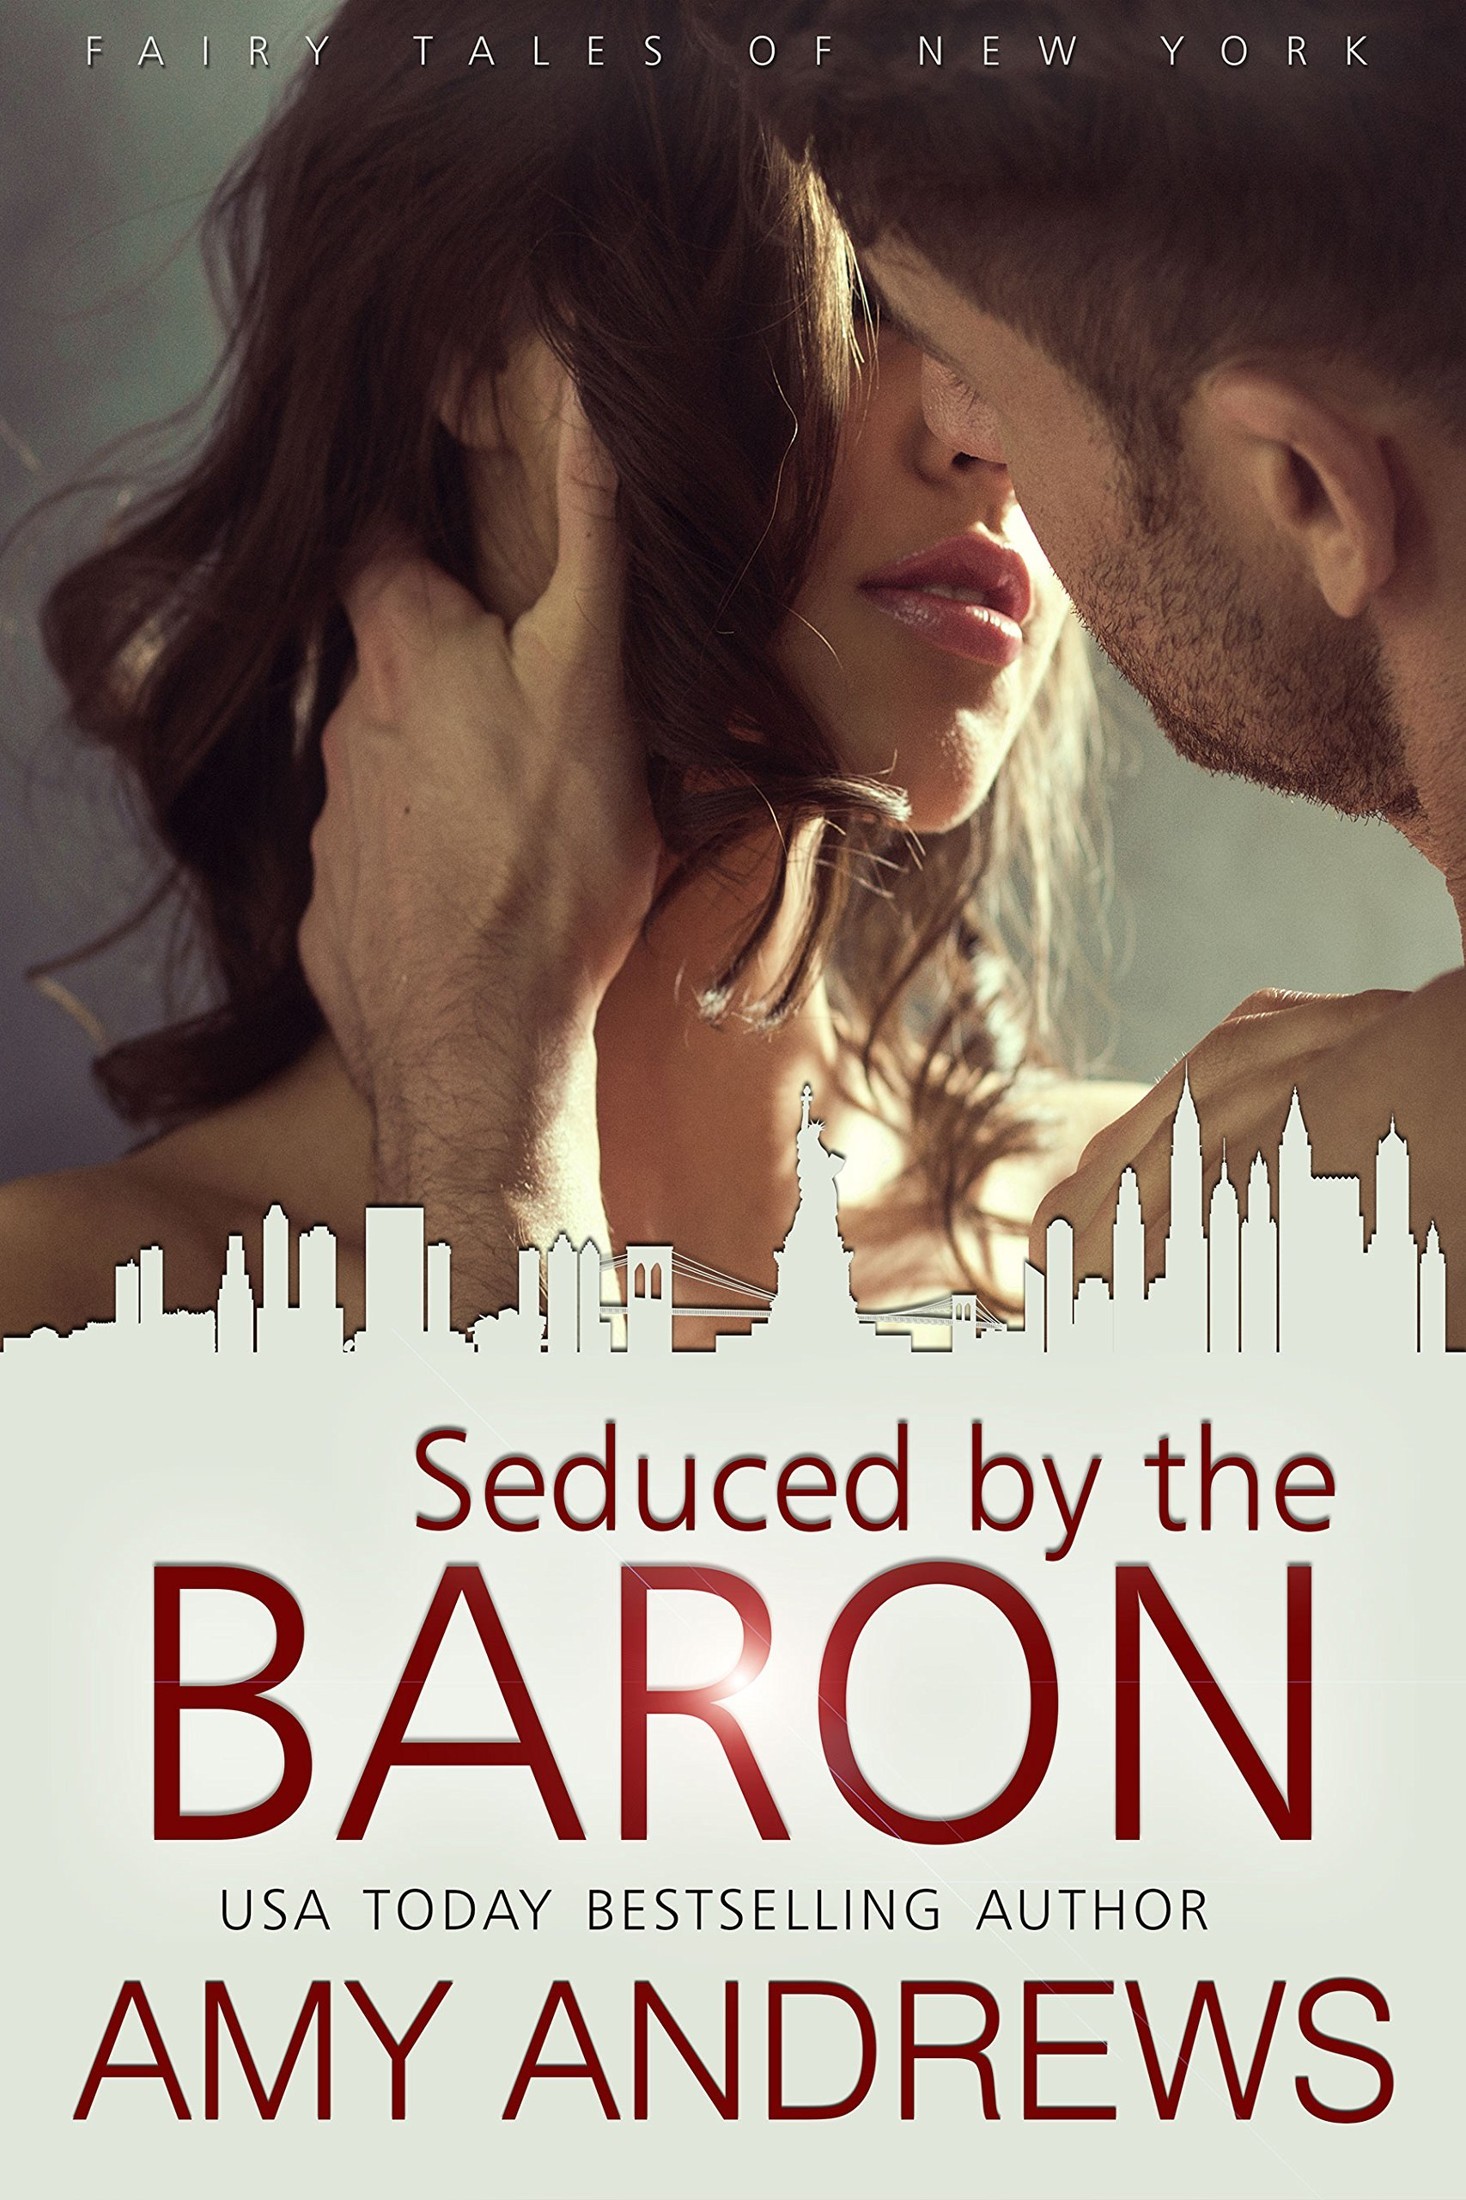 Seduced by the Baron (The Fairy Tales of New York Book 4) by Amy Andrews